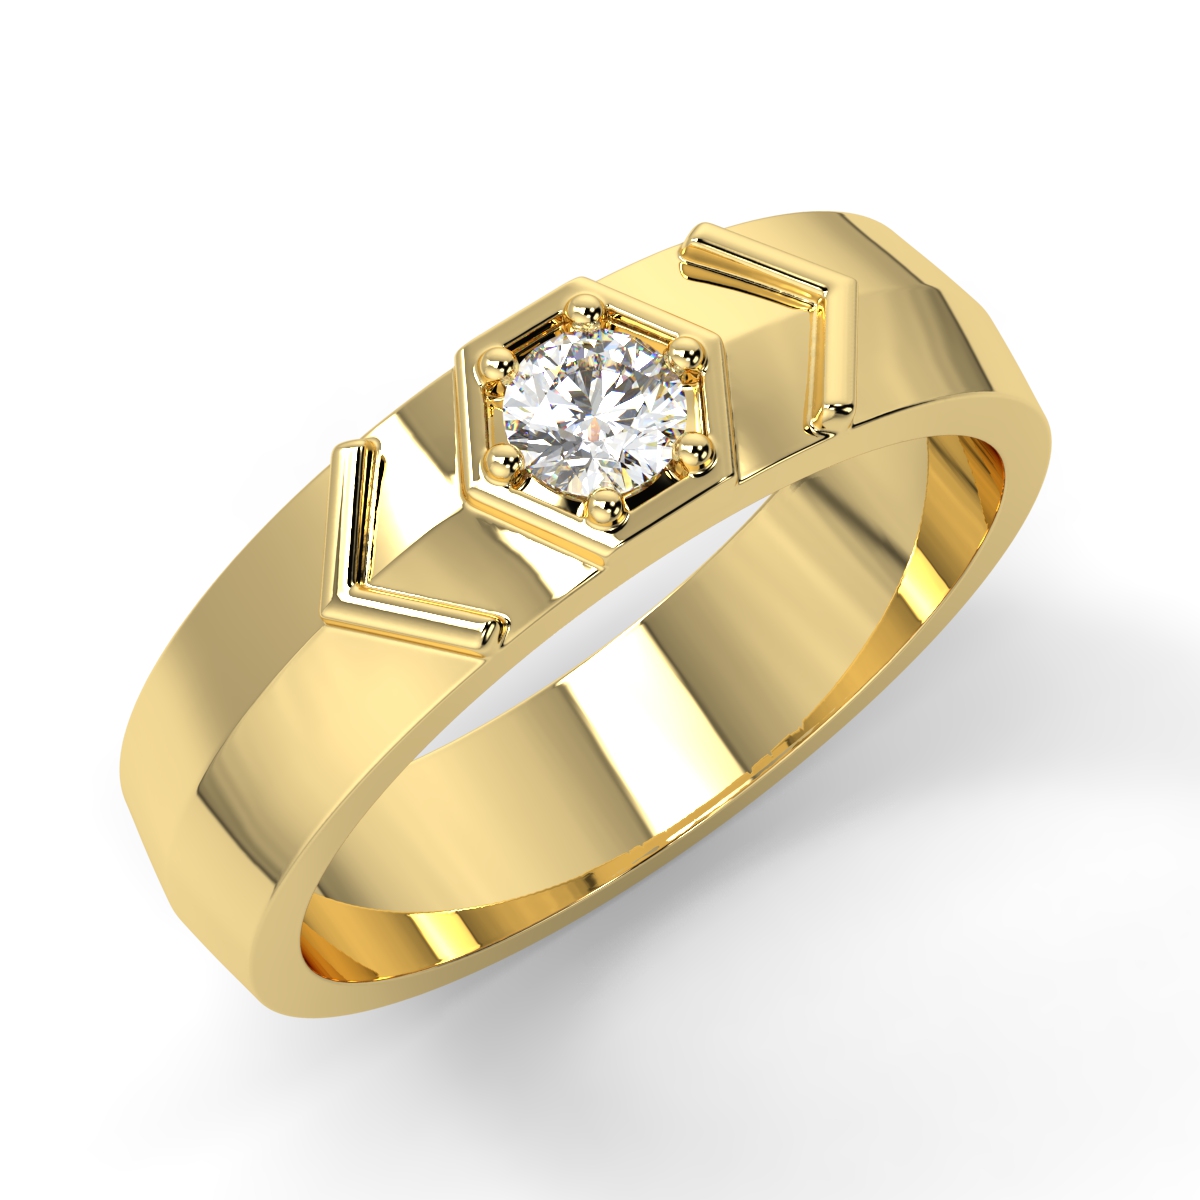 Soul-i-taire Gents Ring